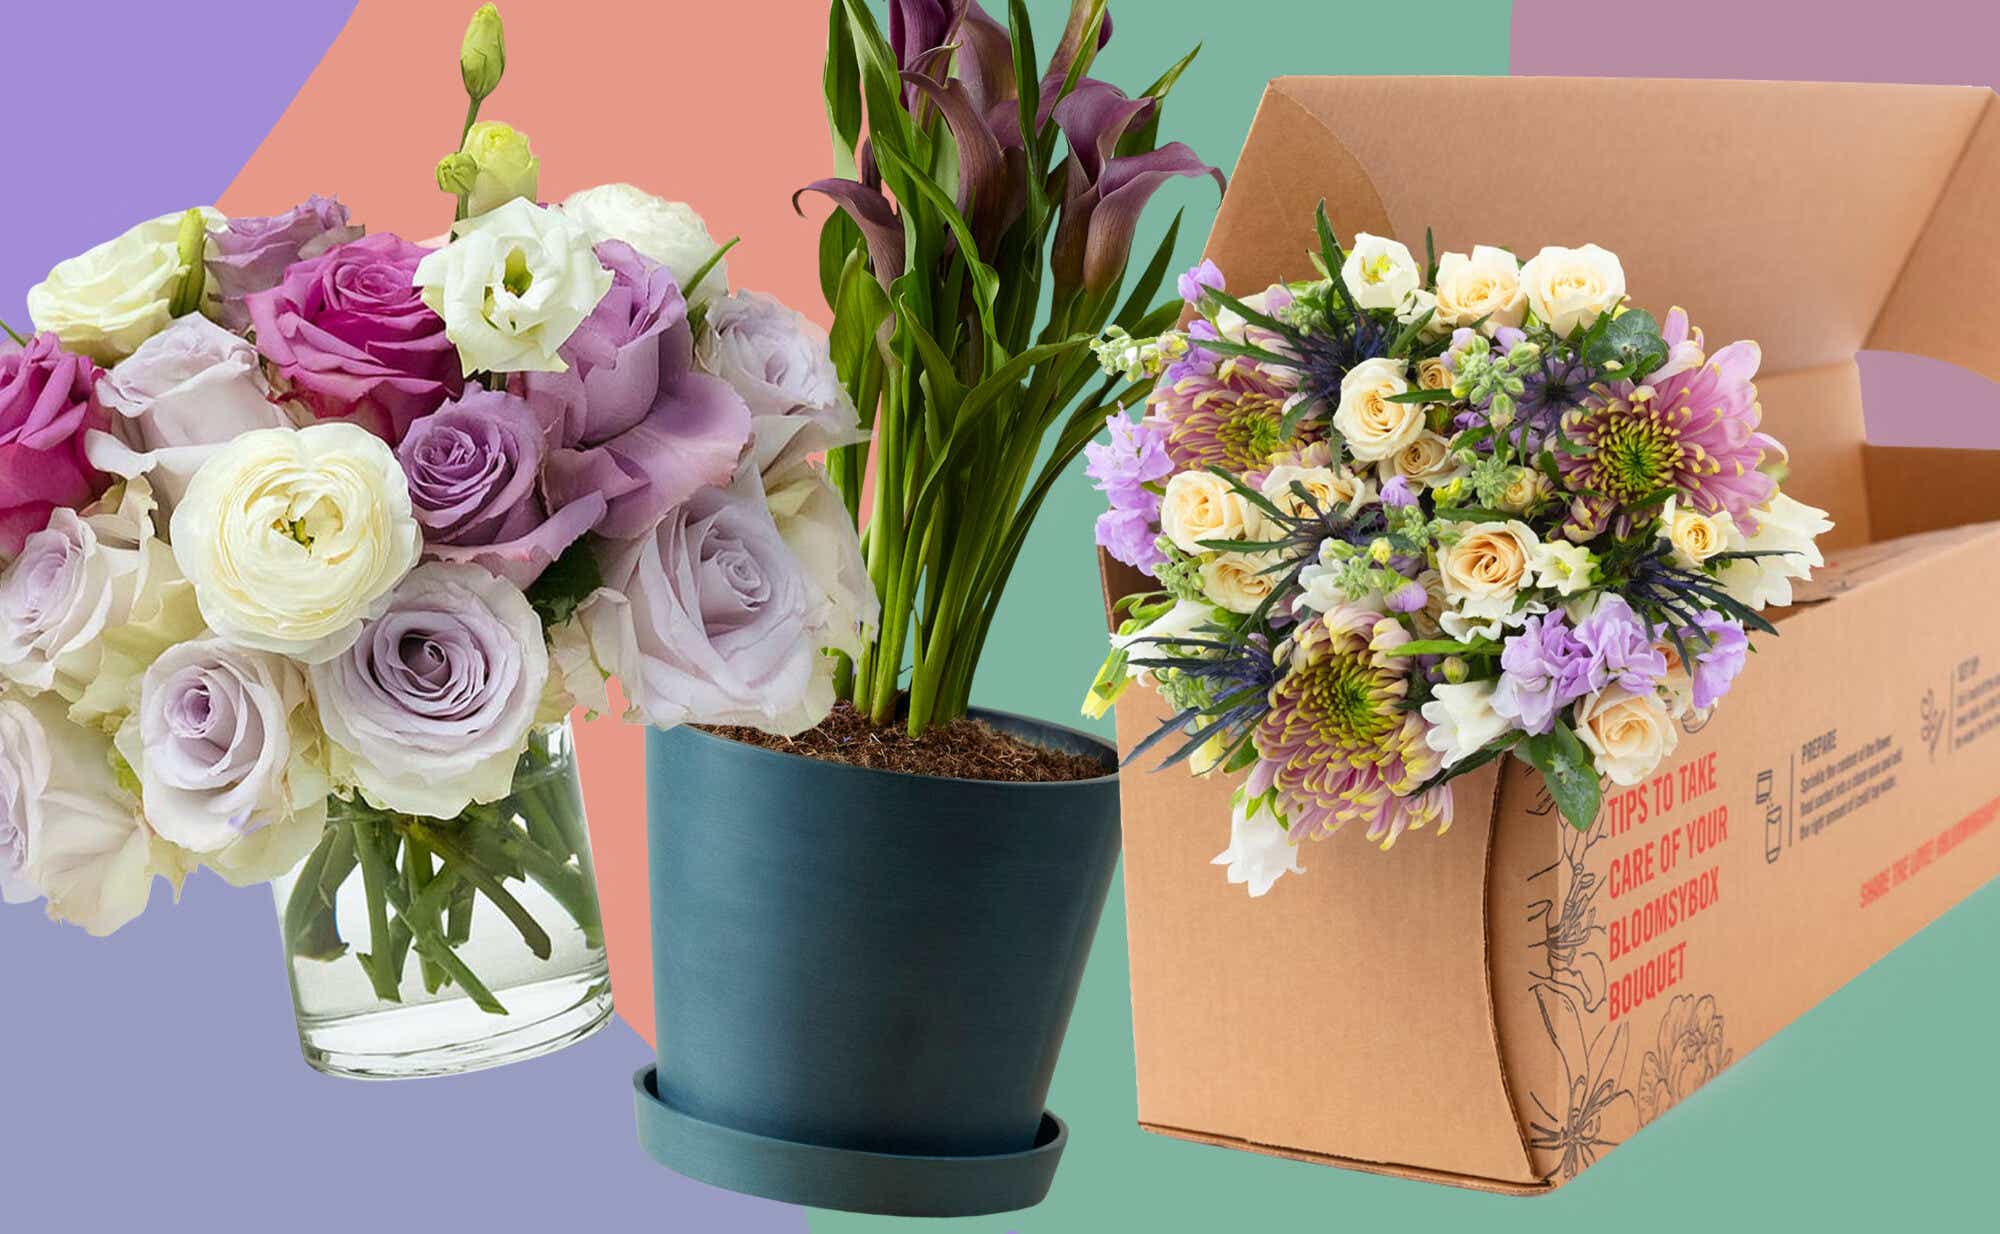 https://katiecouric.com/wp-content/uploads/2023/04/Flower-Delivery-2000x1234.jpg